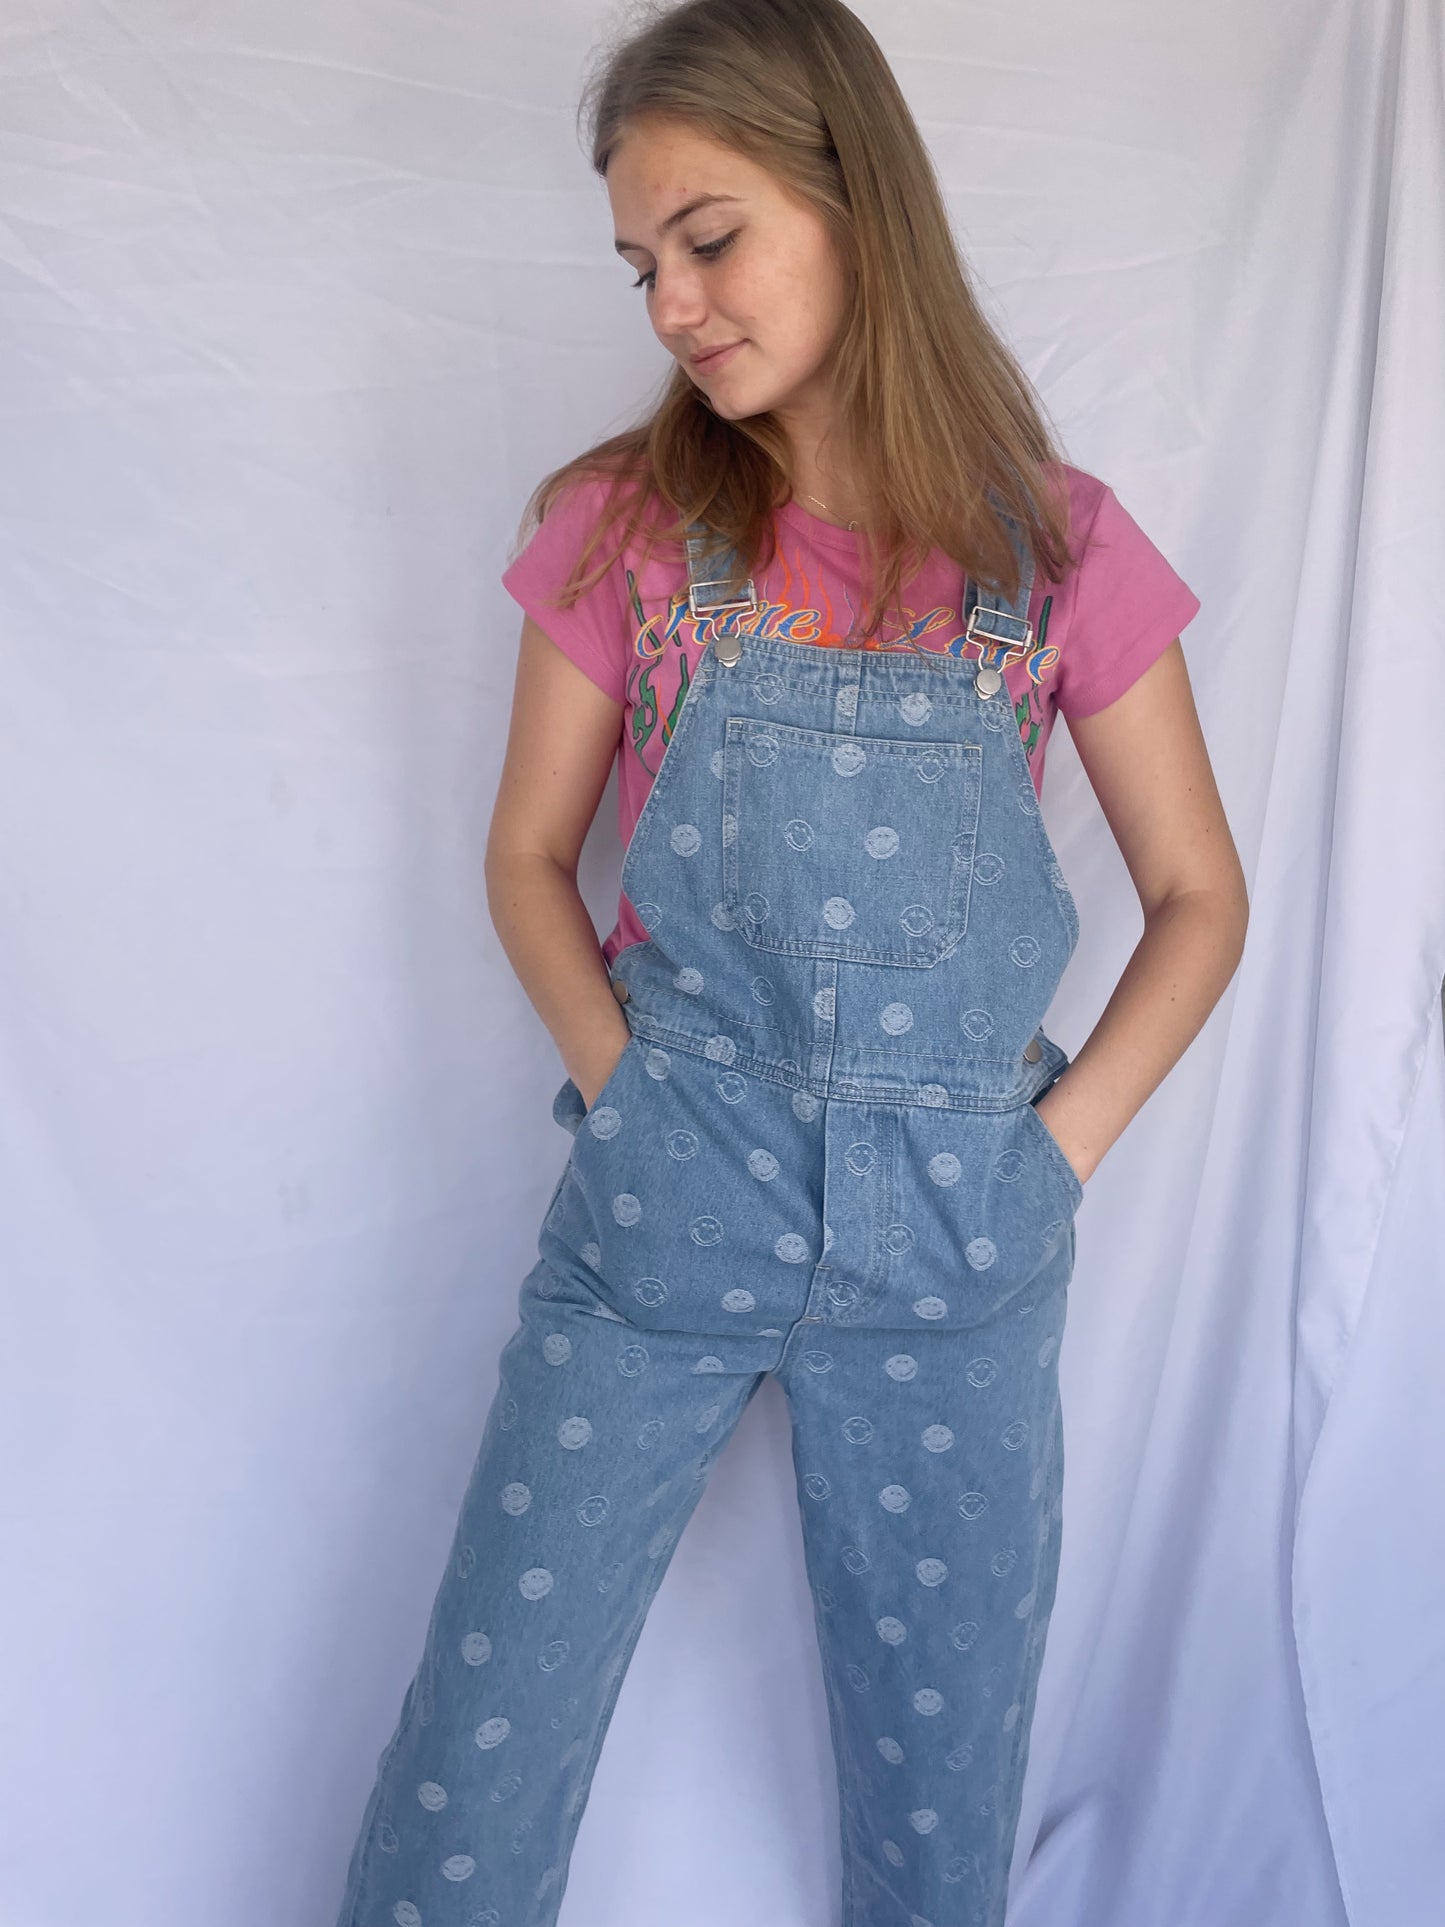 Share A Smile Overalls